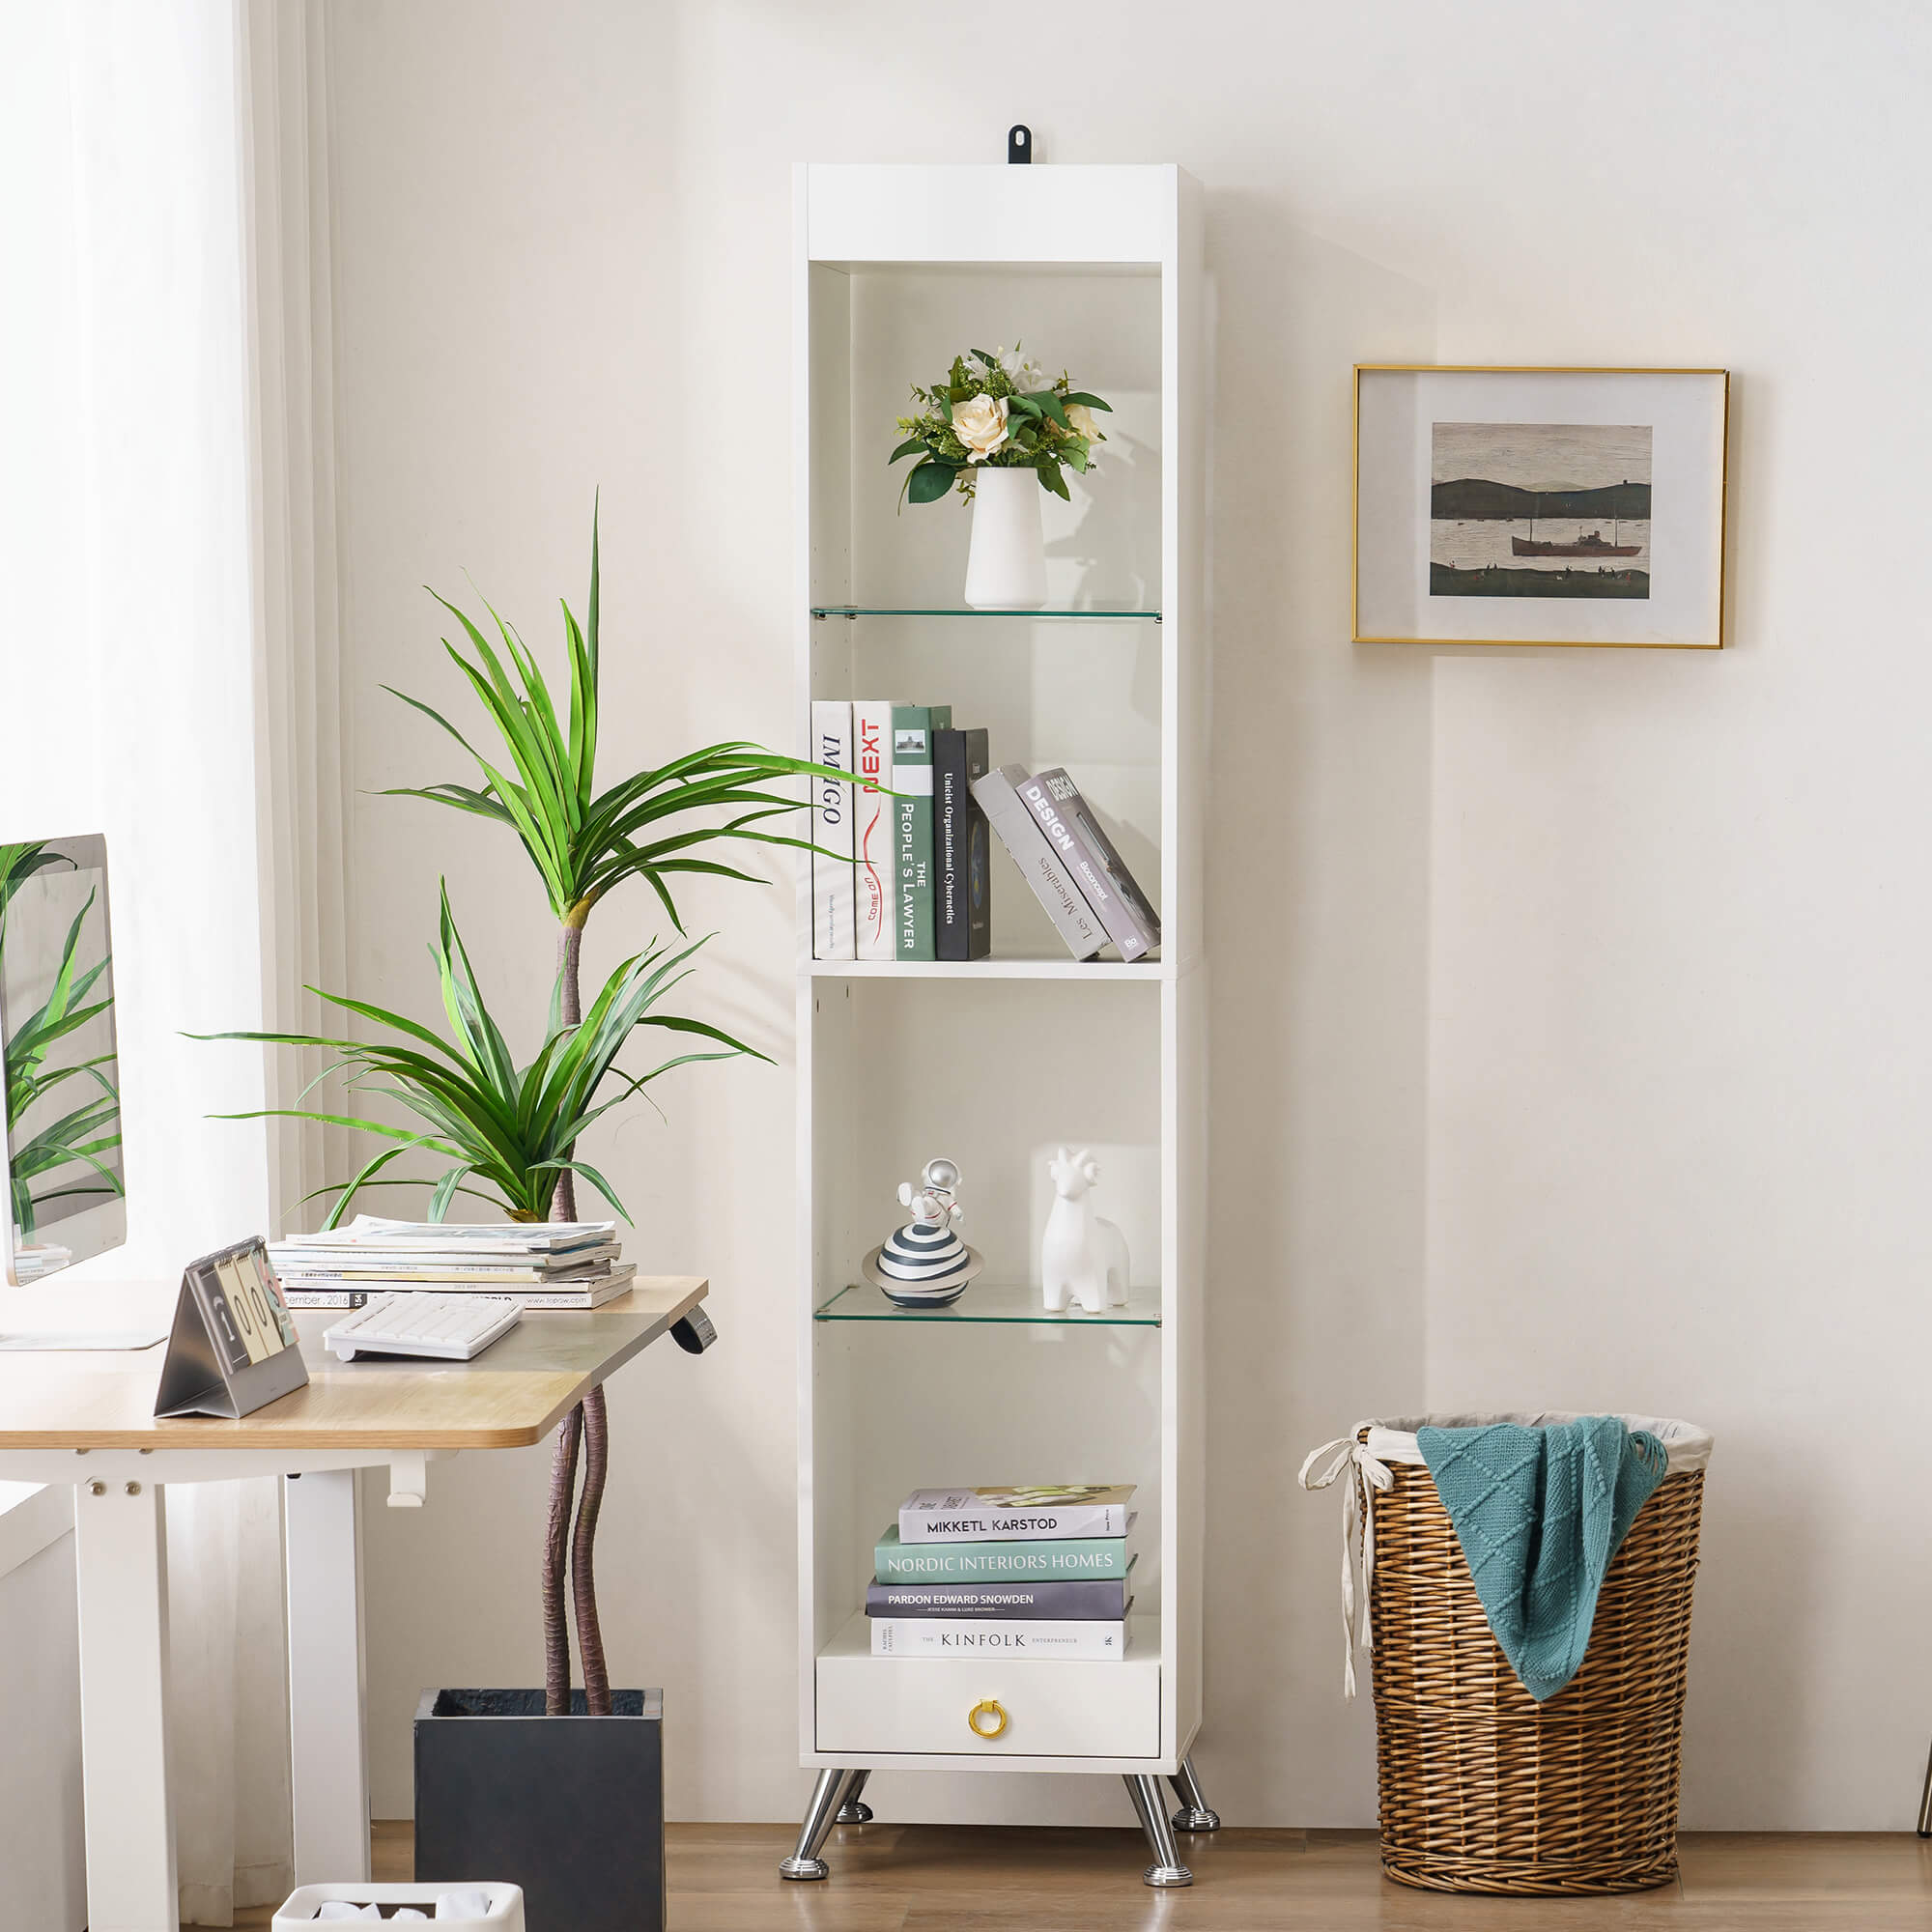 Ivinta Tall Bookshelf for Small Spaces, Narrow Bookcase with Adjustable Glass Display Shelf